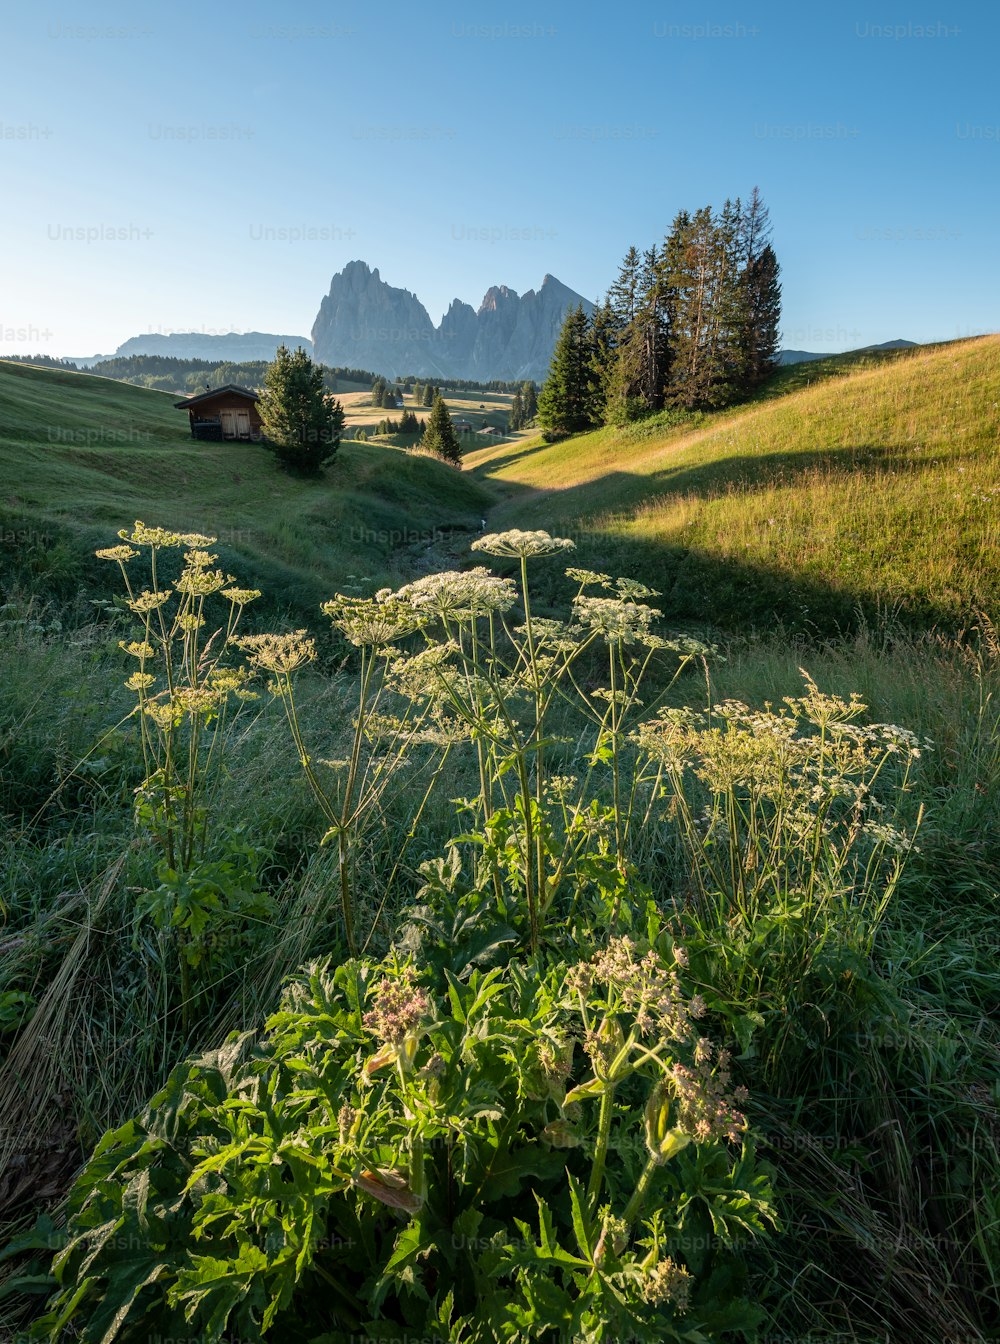 a grassy field with mountains in the background